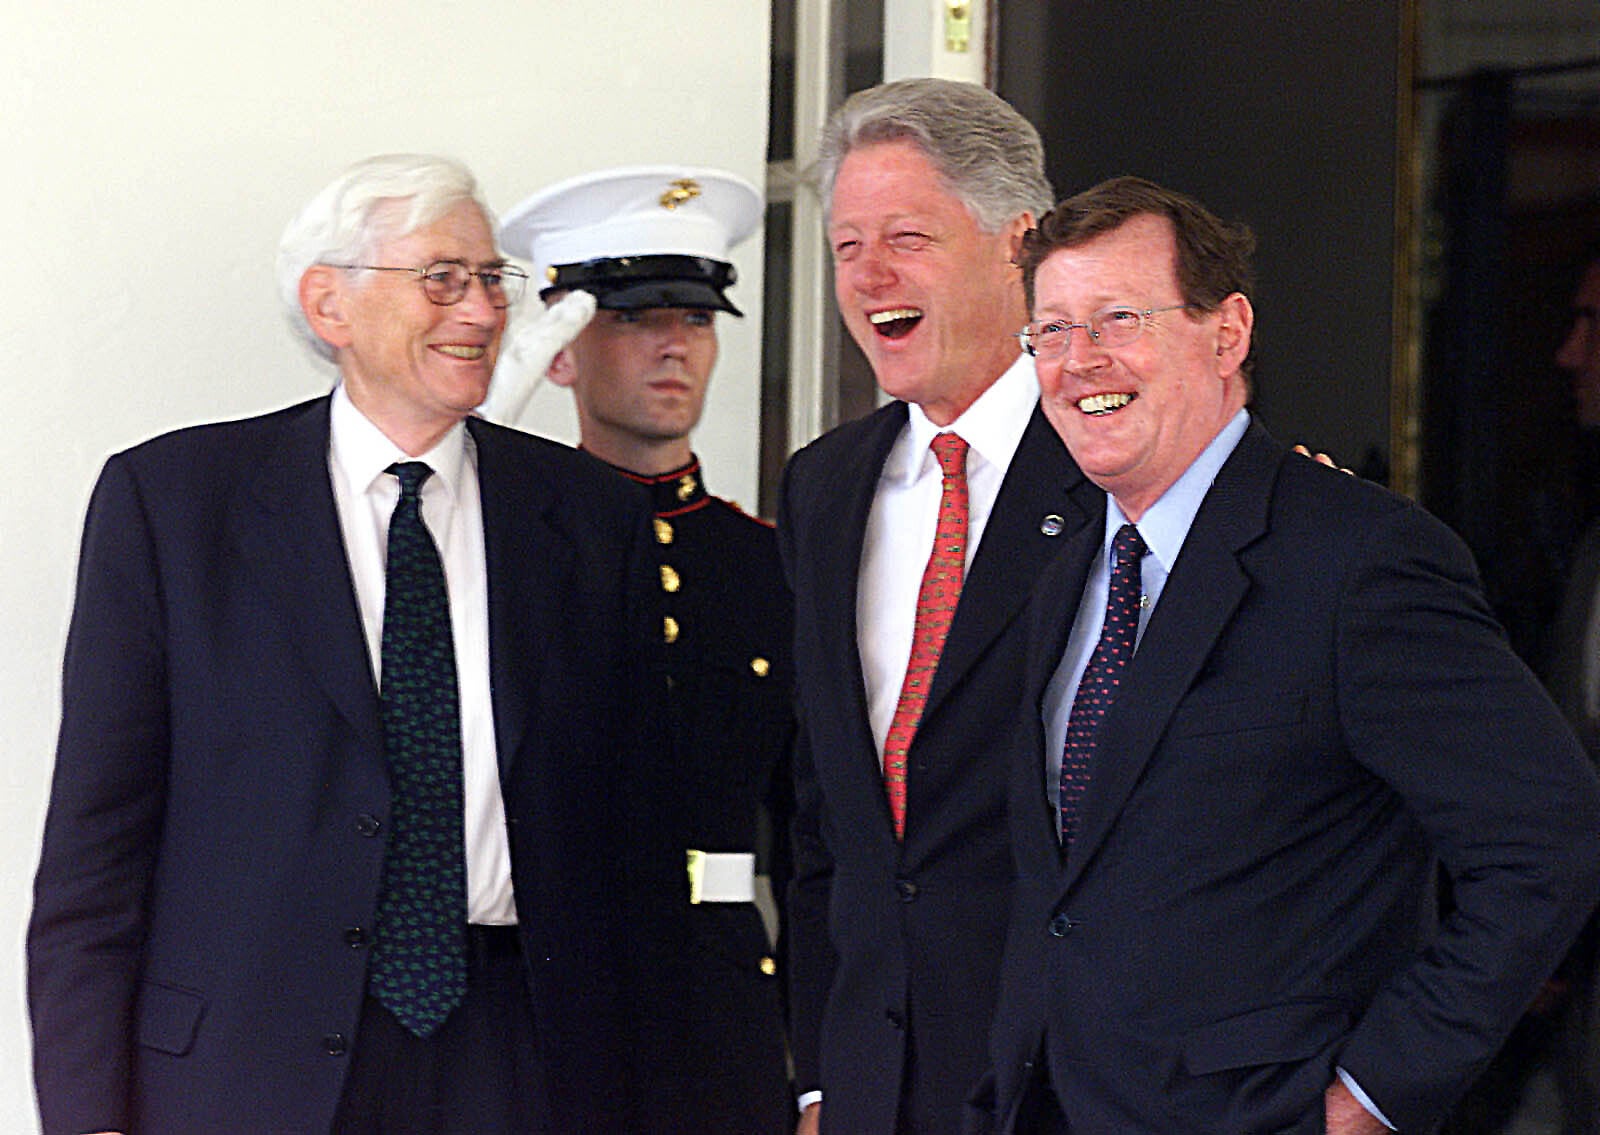 Former US President Bill Clinton, second from right, jokes with Seamus Mallon and David Trimble when they visited the White House in Washington (Paul Faith/PA)